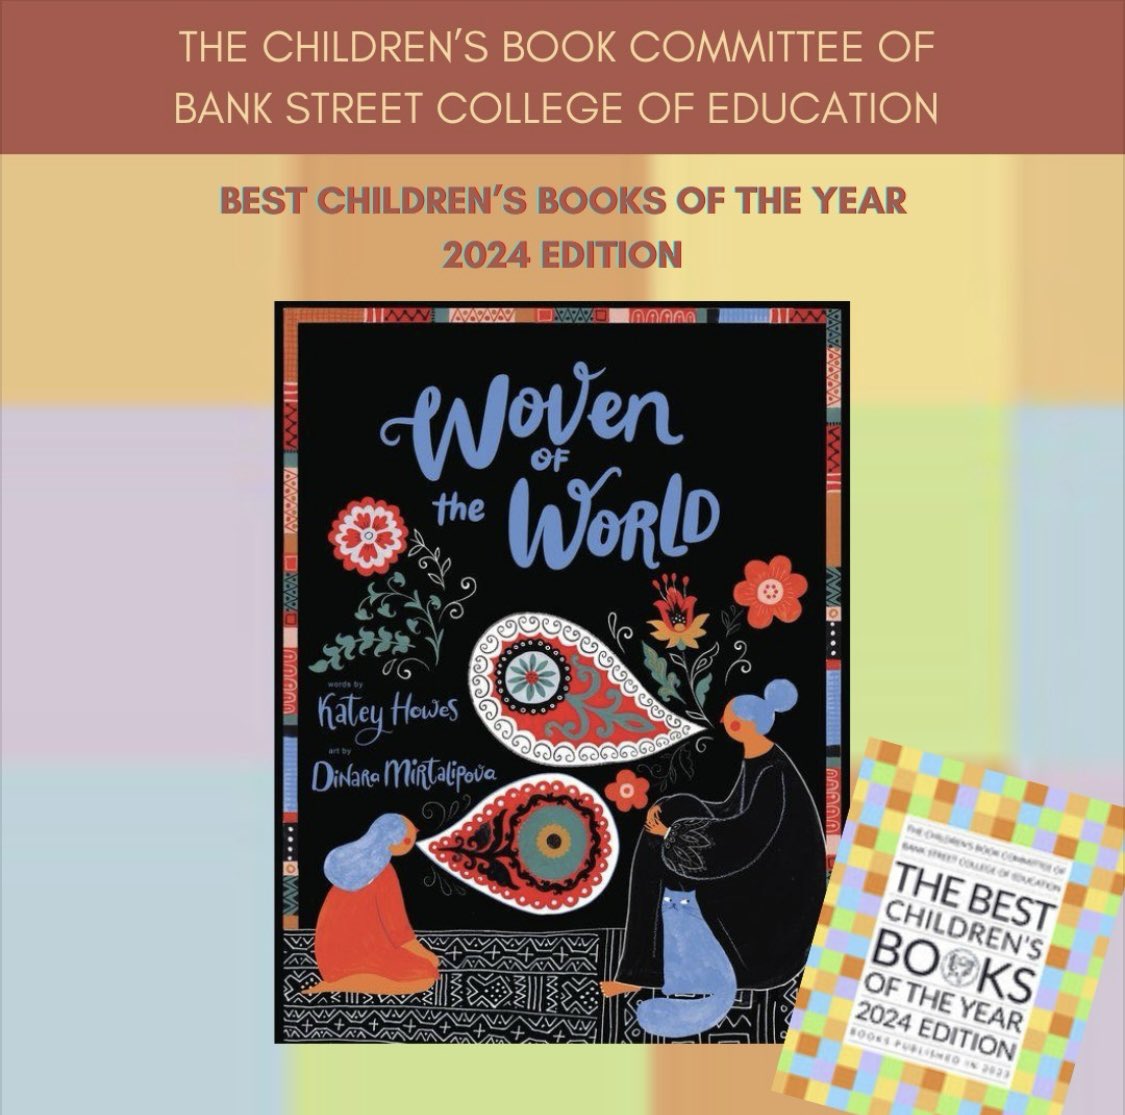 Thrilled to see that WOVEN OF THE WORLD was chosen as one of Bank Street's Best Children's Books of the year! So many amazing titles amongst their selections. Be sure you check them out! #kidlit #booklovers